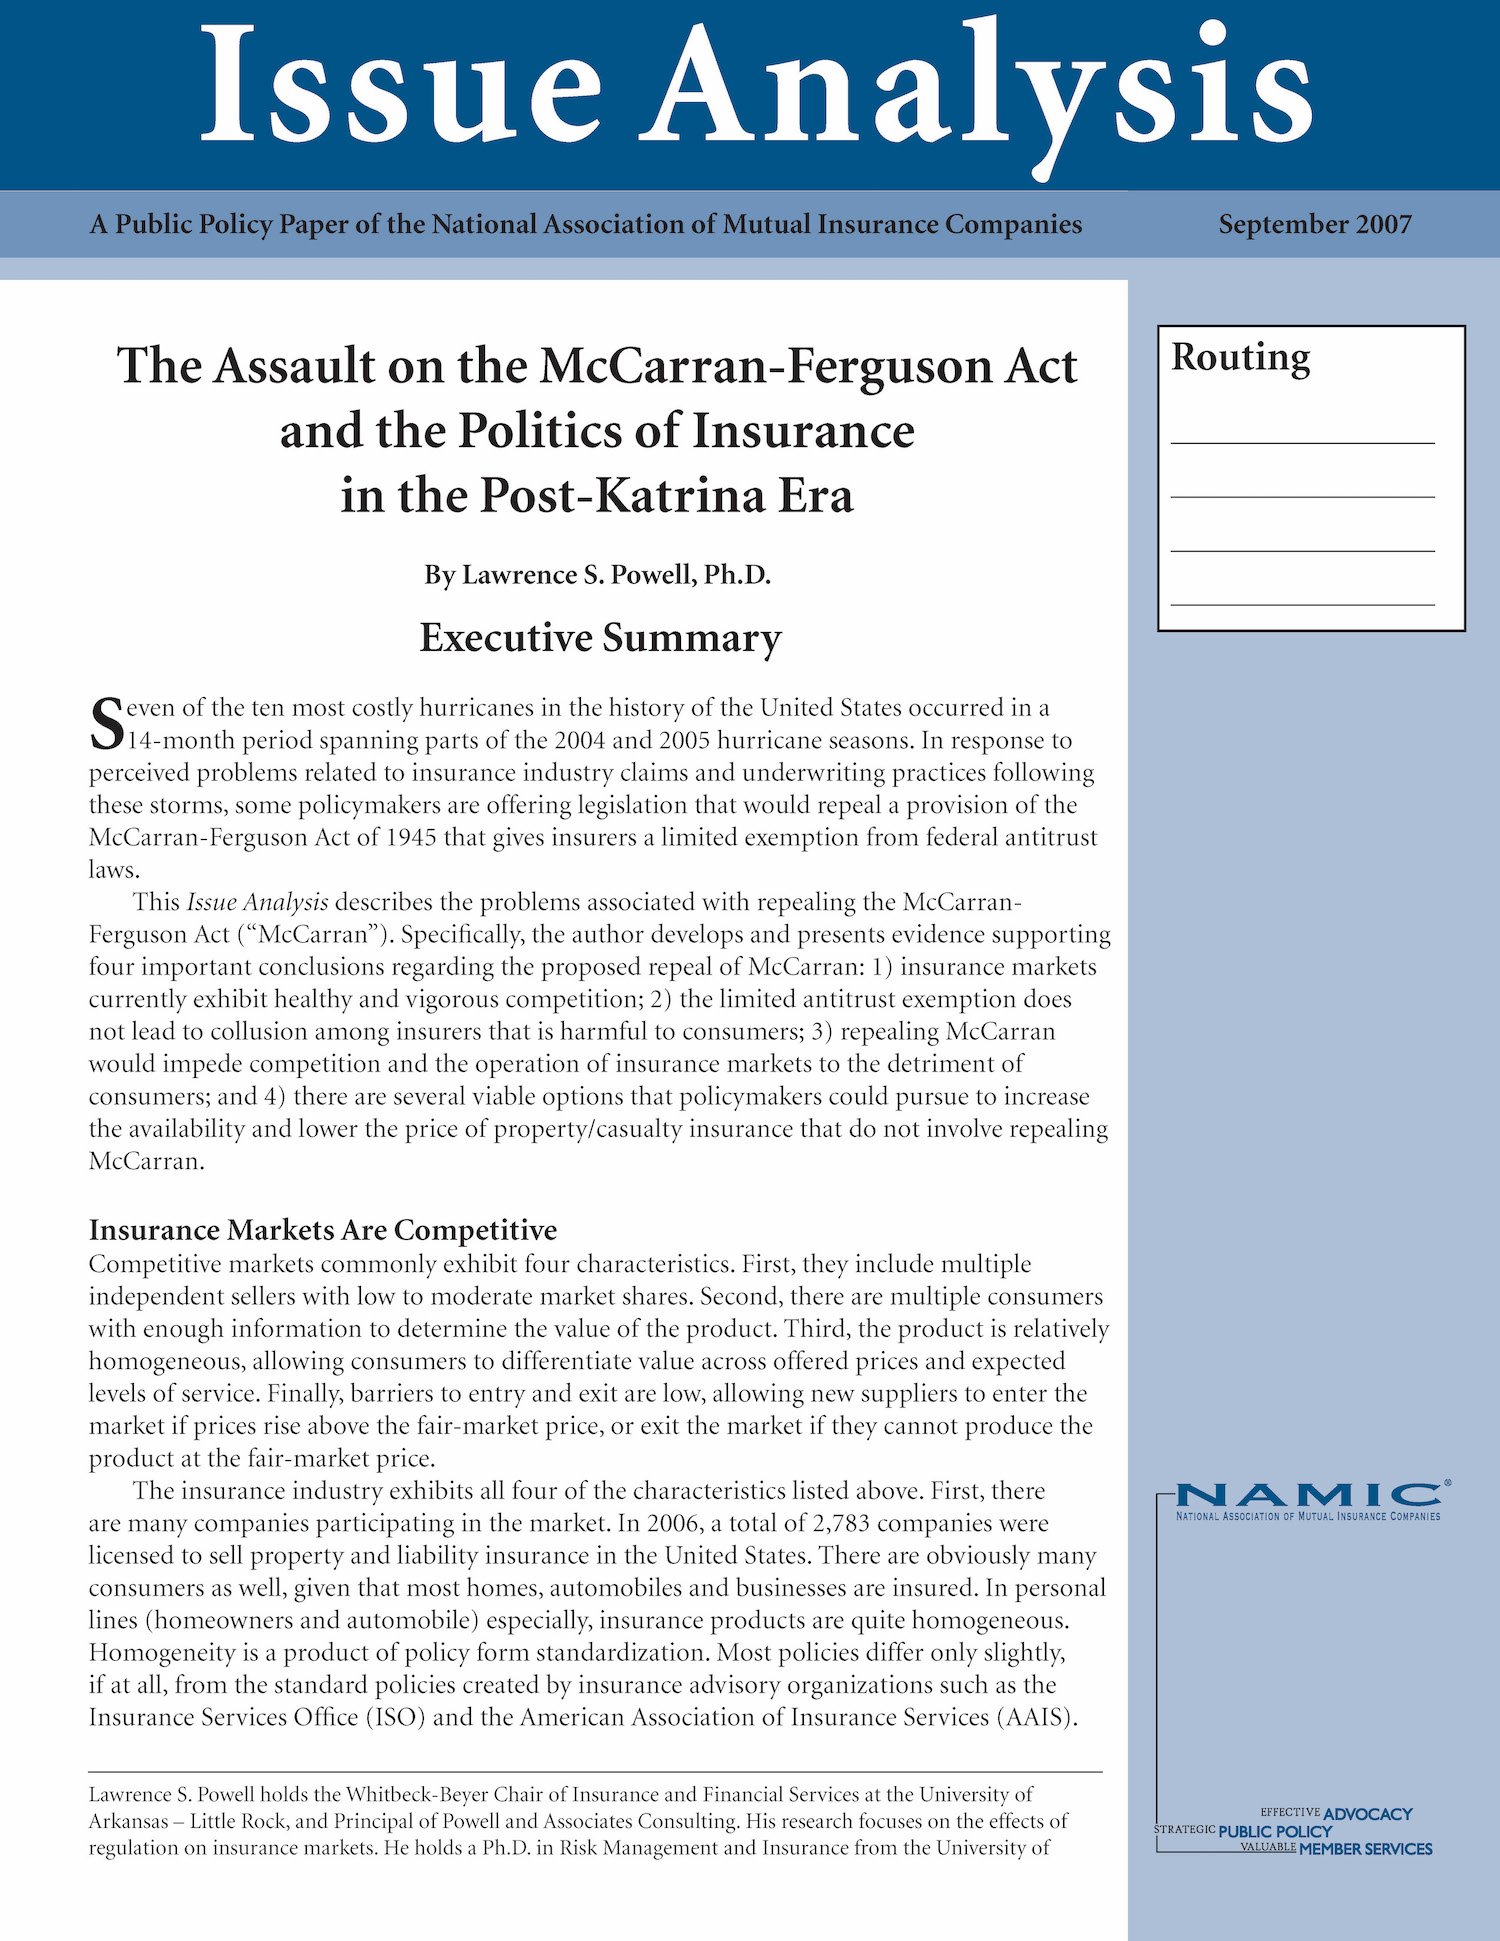 The Assault on the McCarran-Ferguson Act and the Politics of Insurance in the Post-Katrina Era PDF